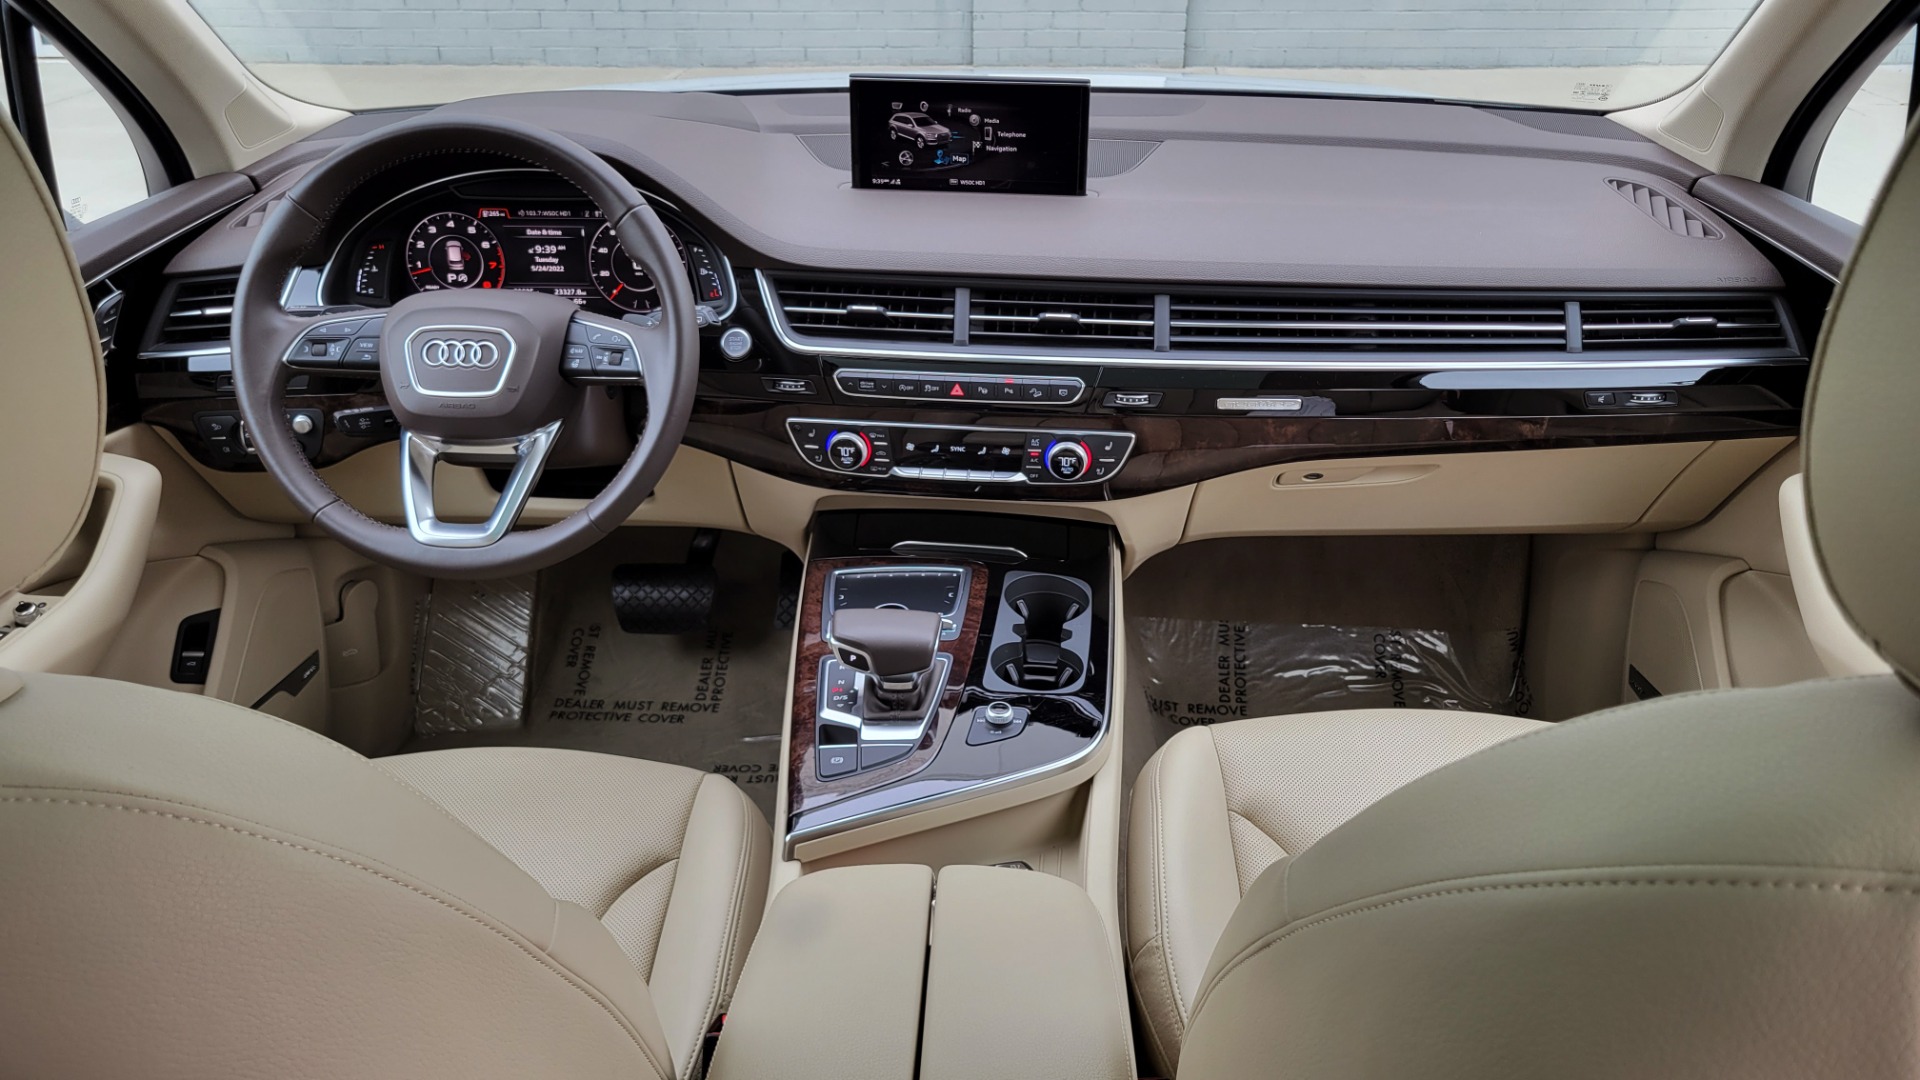 Used 2019 Audi Q7 PRESTIGE / CONV PKG / BOSE / HUD / CLD WTHR / TOWING / REARVIEW for sale $51,995 at Formula Imports in Charlotte NC 28227 98